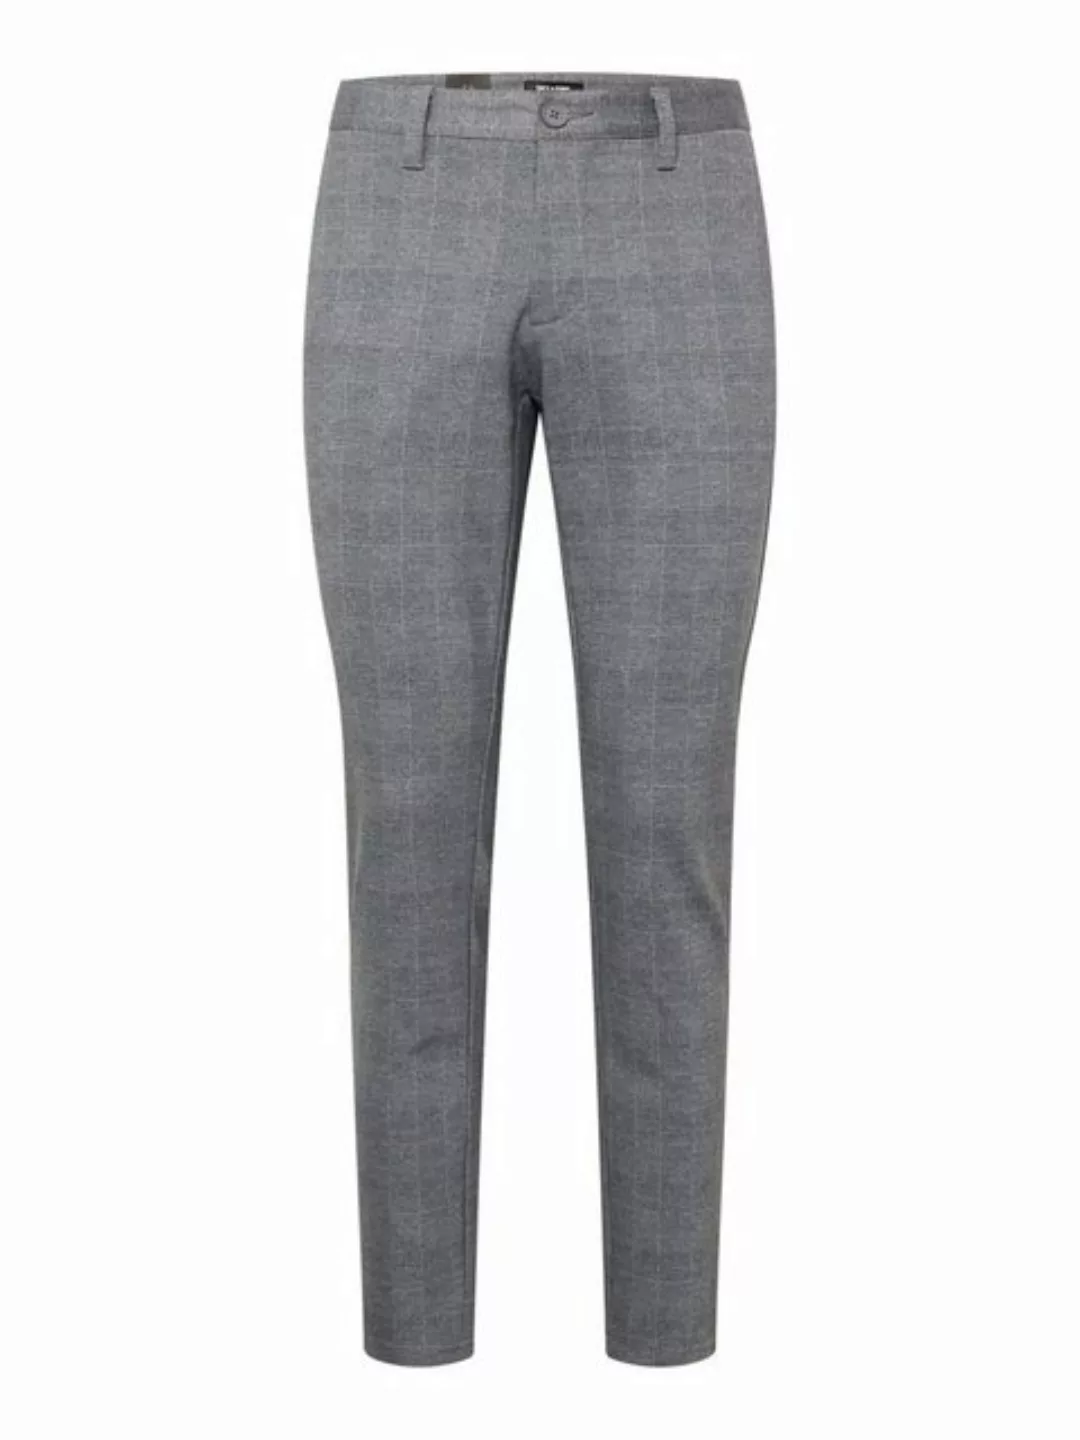 ONLY & SONS Chinohose MARK CHECK PANTS günstig online kaufen